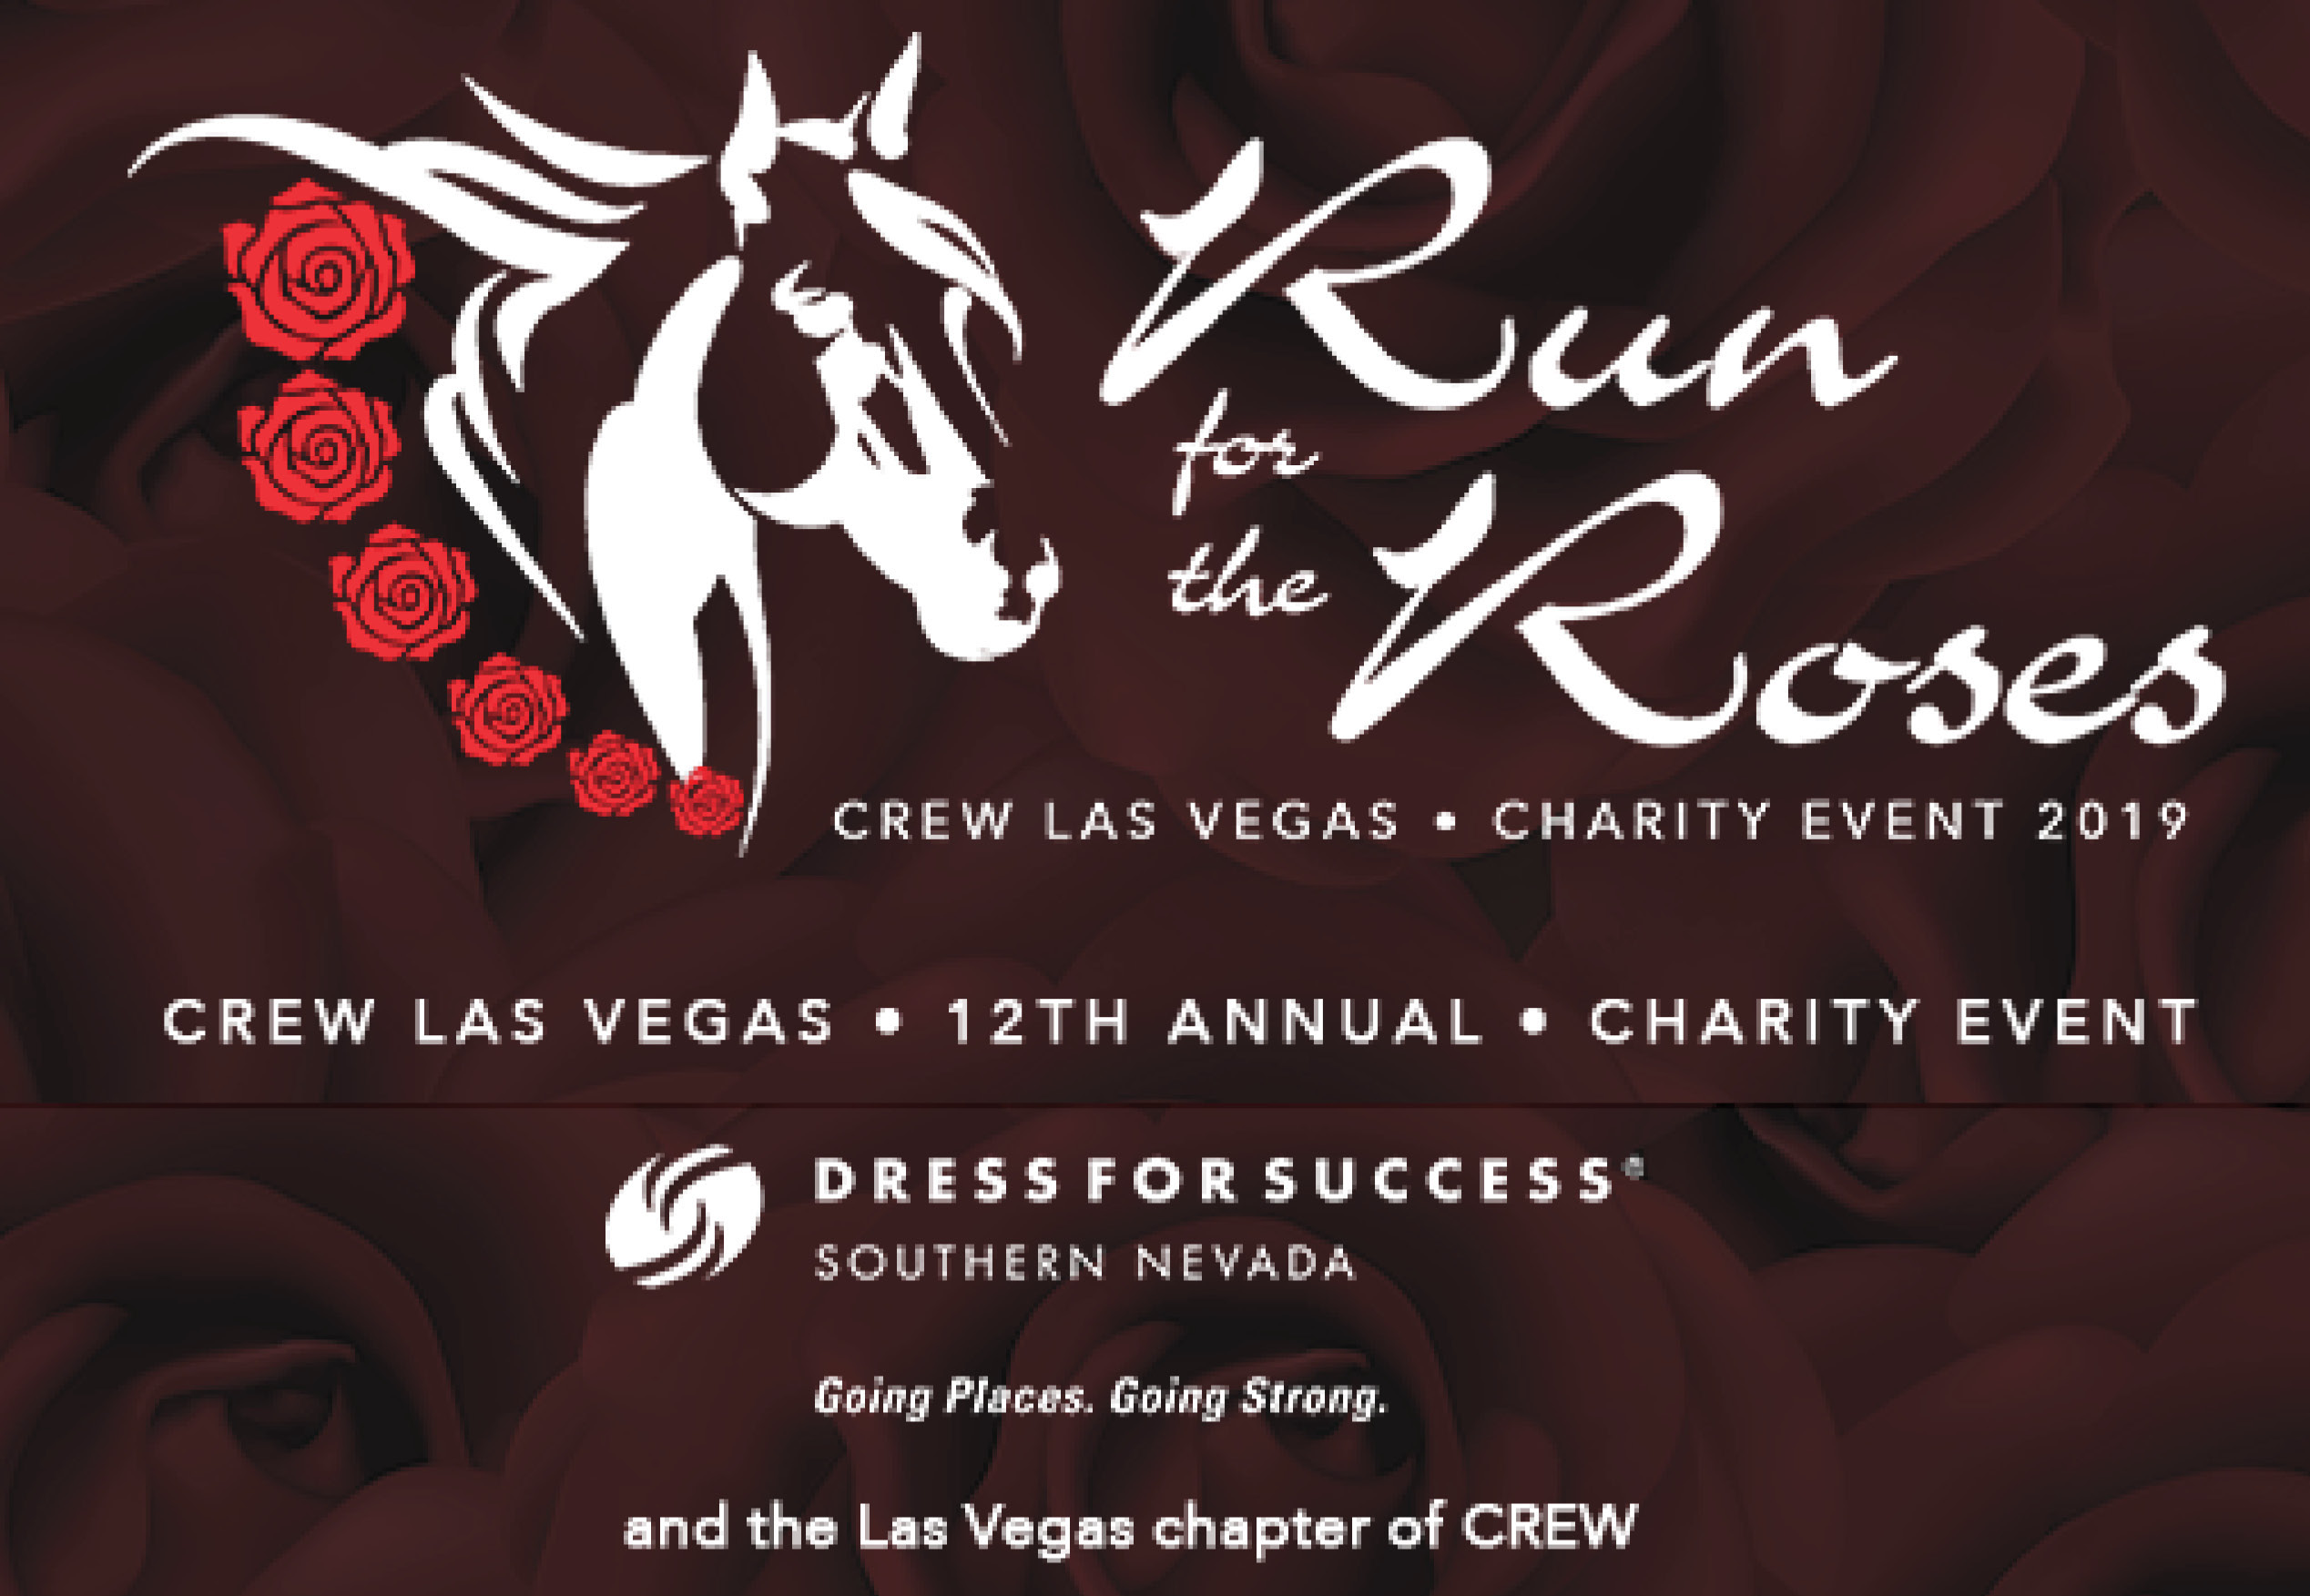 NAI Vegas Sponsors the 12th Annual Run for the Roses Charity Event